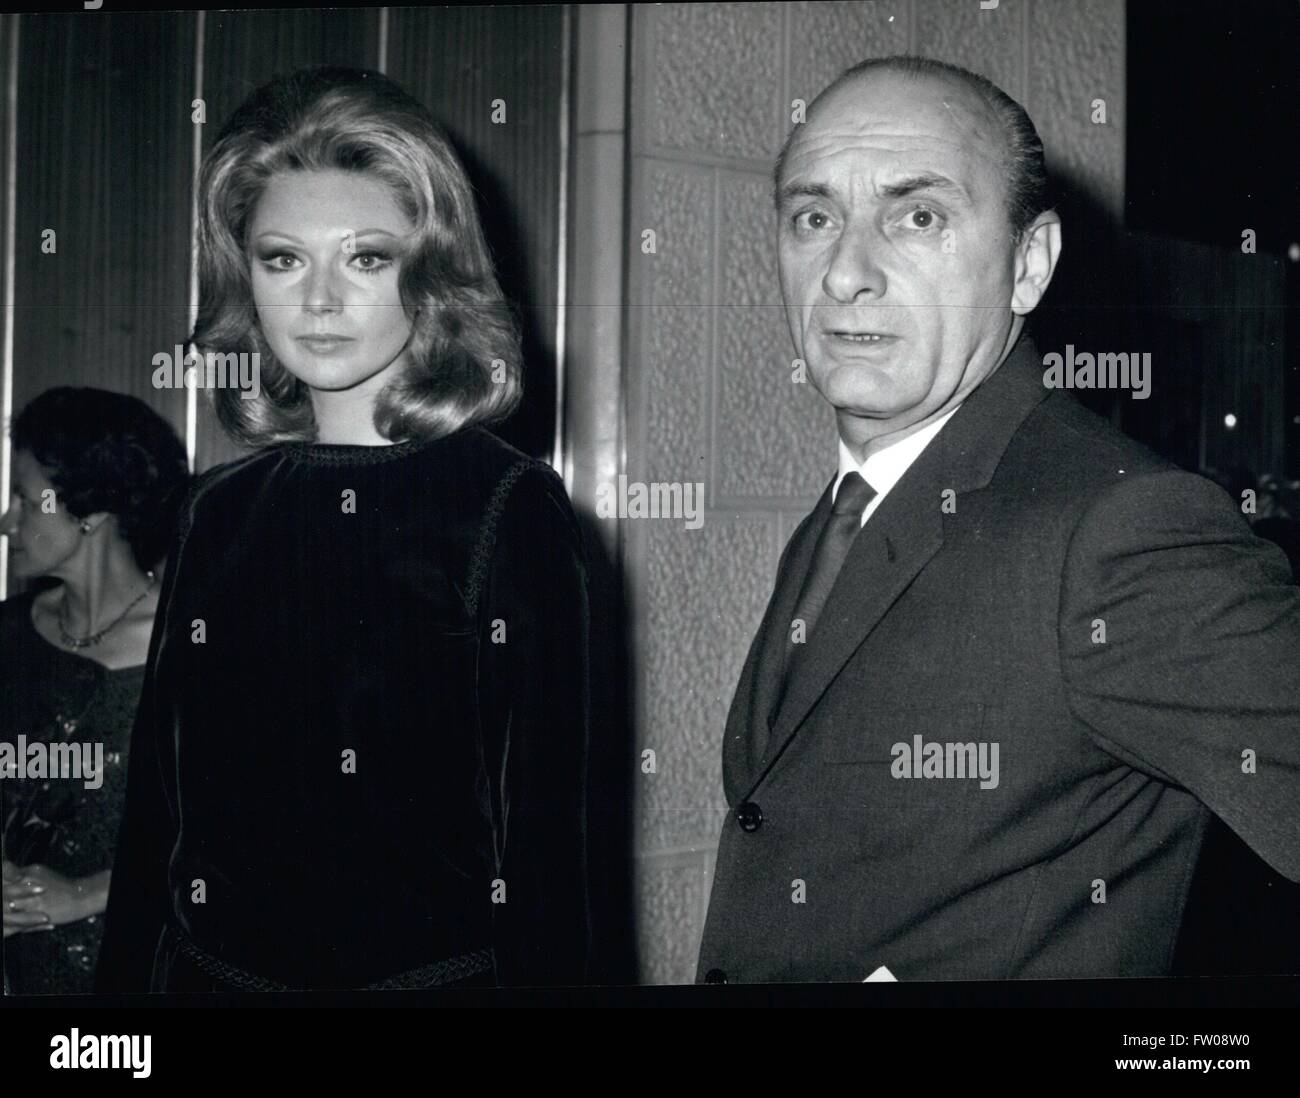 1967 - Actress Sylva Koscina announces the end of her marriage with Raimondo Castelli. The wedding was celebrated about ten years ago in Mexico City. The affectionate lie that united the couple stops after 15 years. © Keystone Pictures USA/ZUMAPRESS.com/Alamy Live News Stock Photo